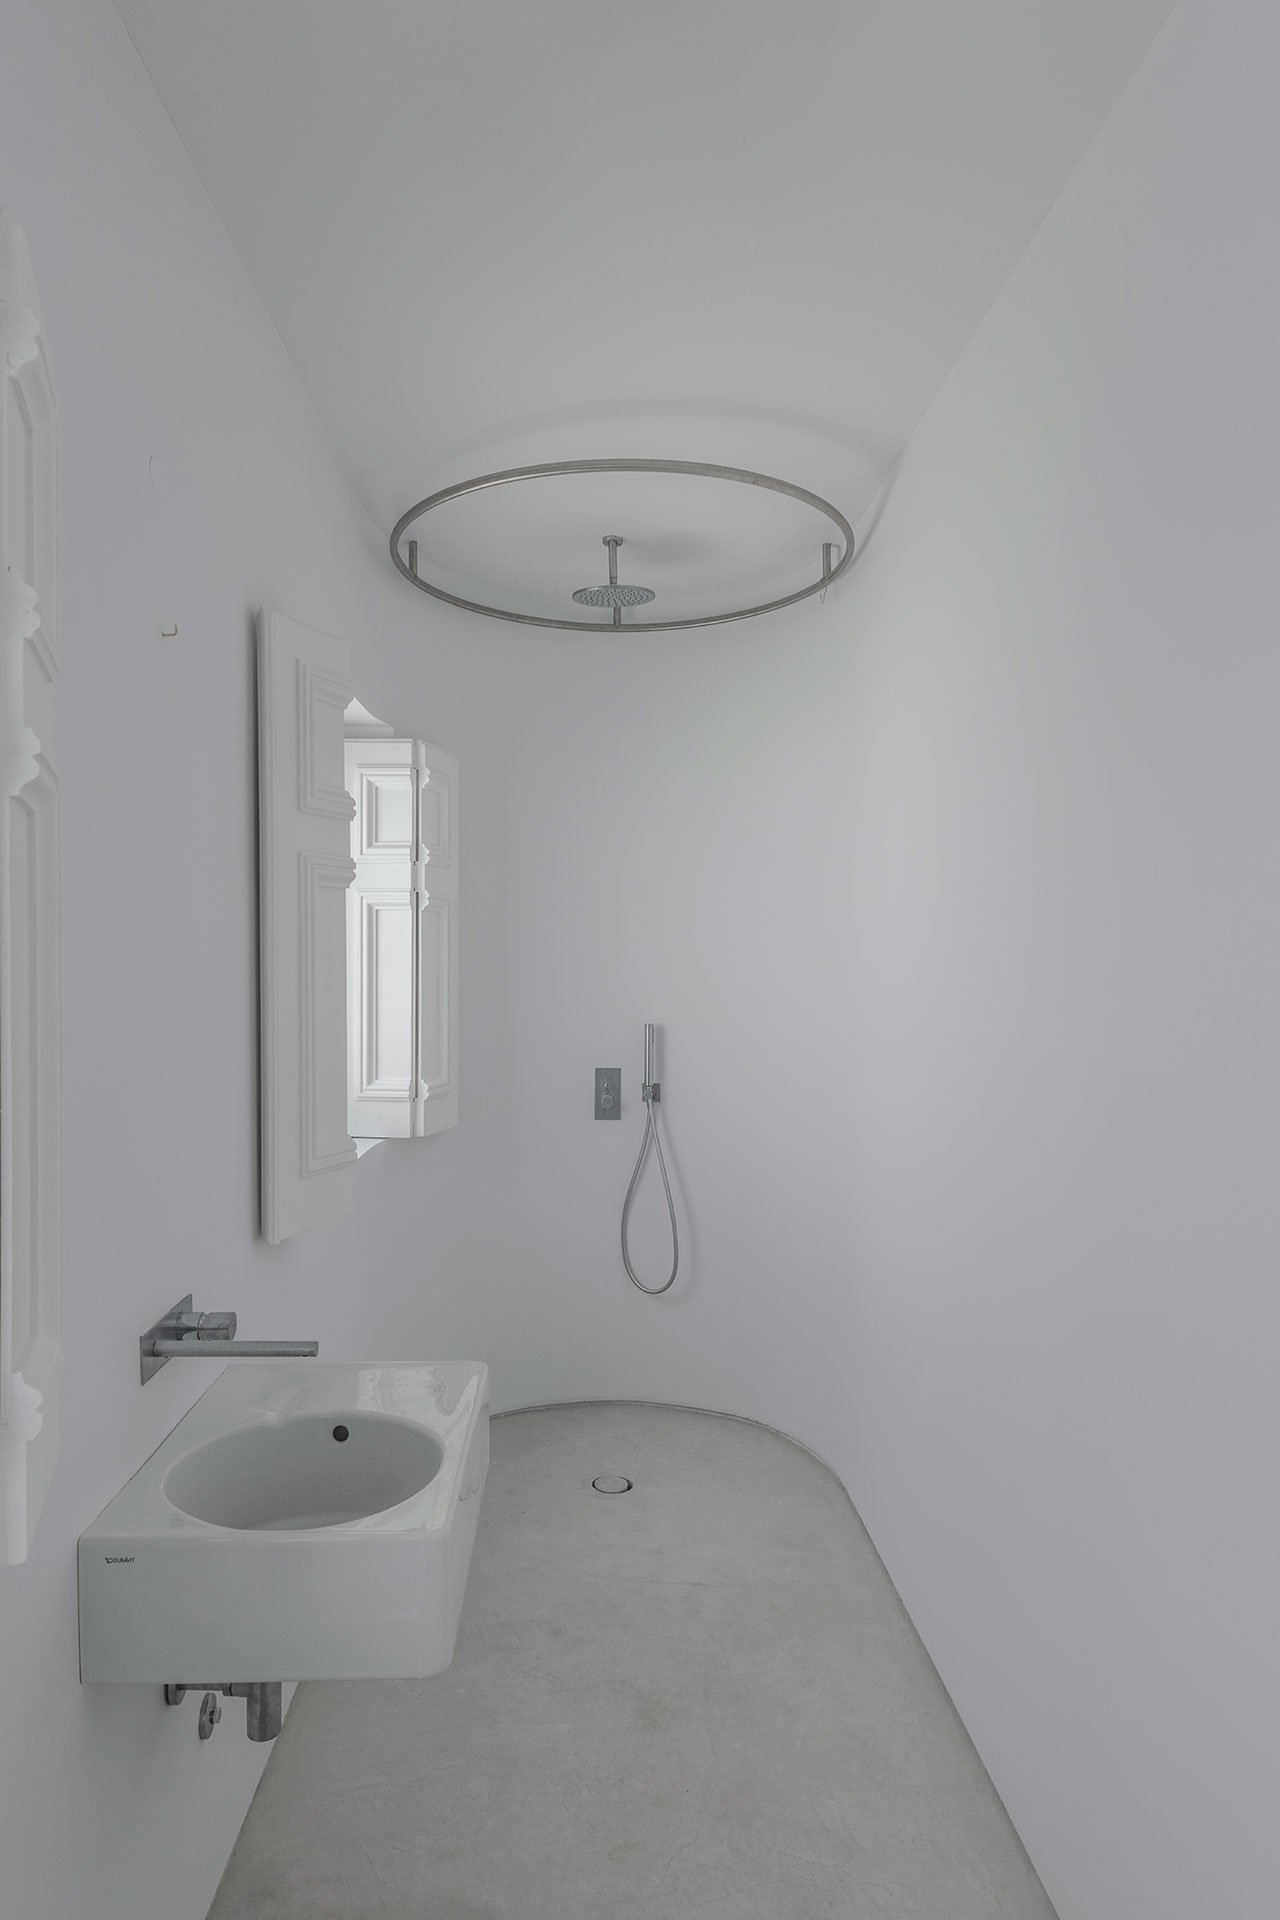 The bathroom is pure white, with a small shower space and a wall mounted sink, the original shutters preserved